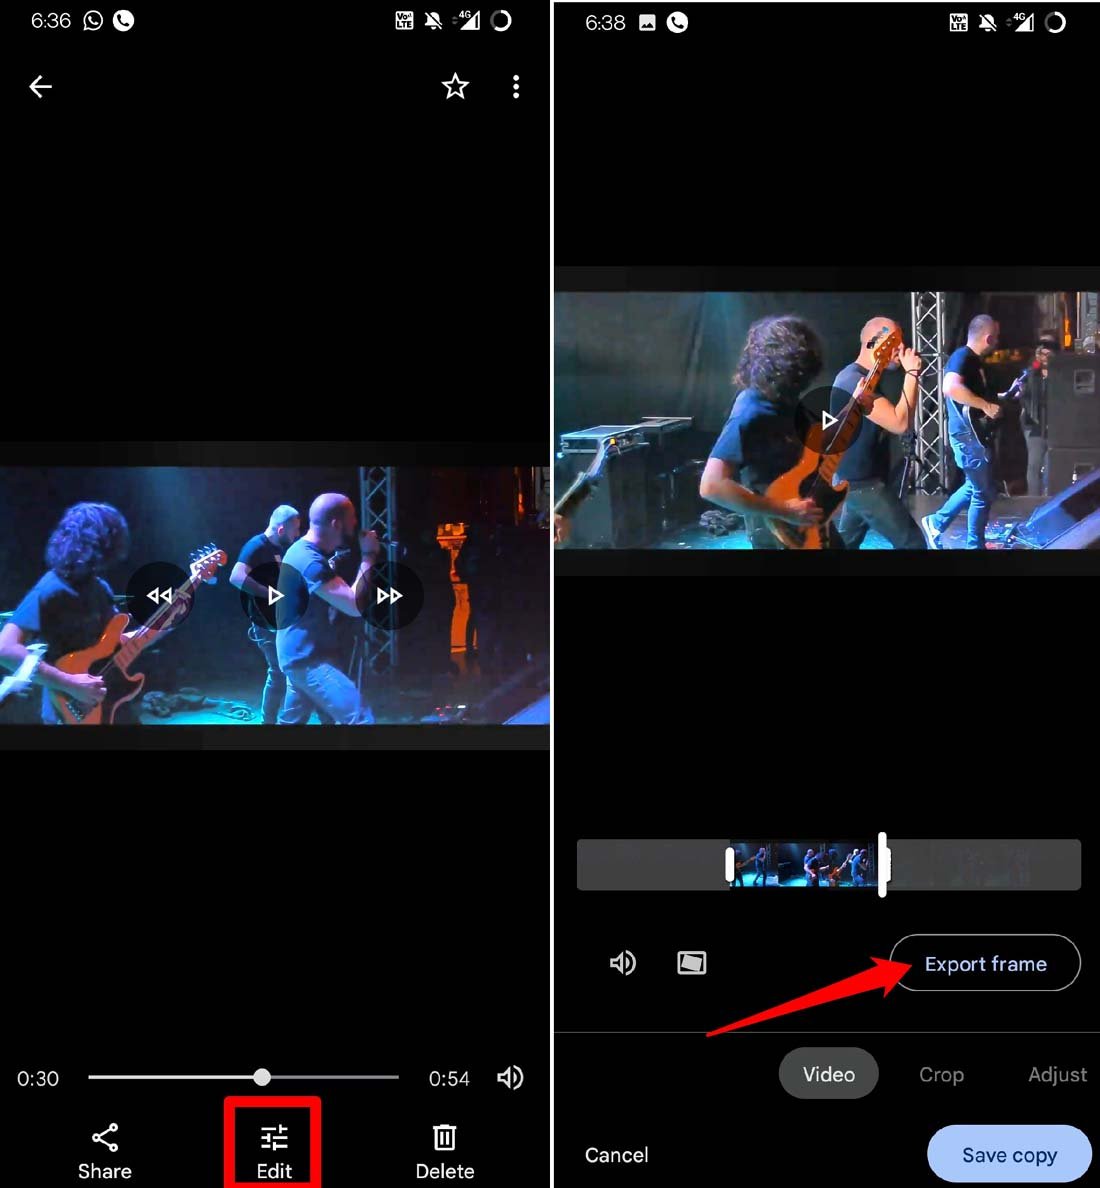 export frame off a video in Google Photos